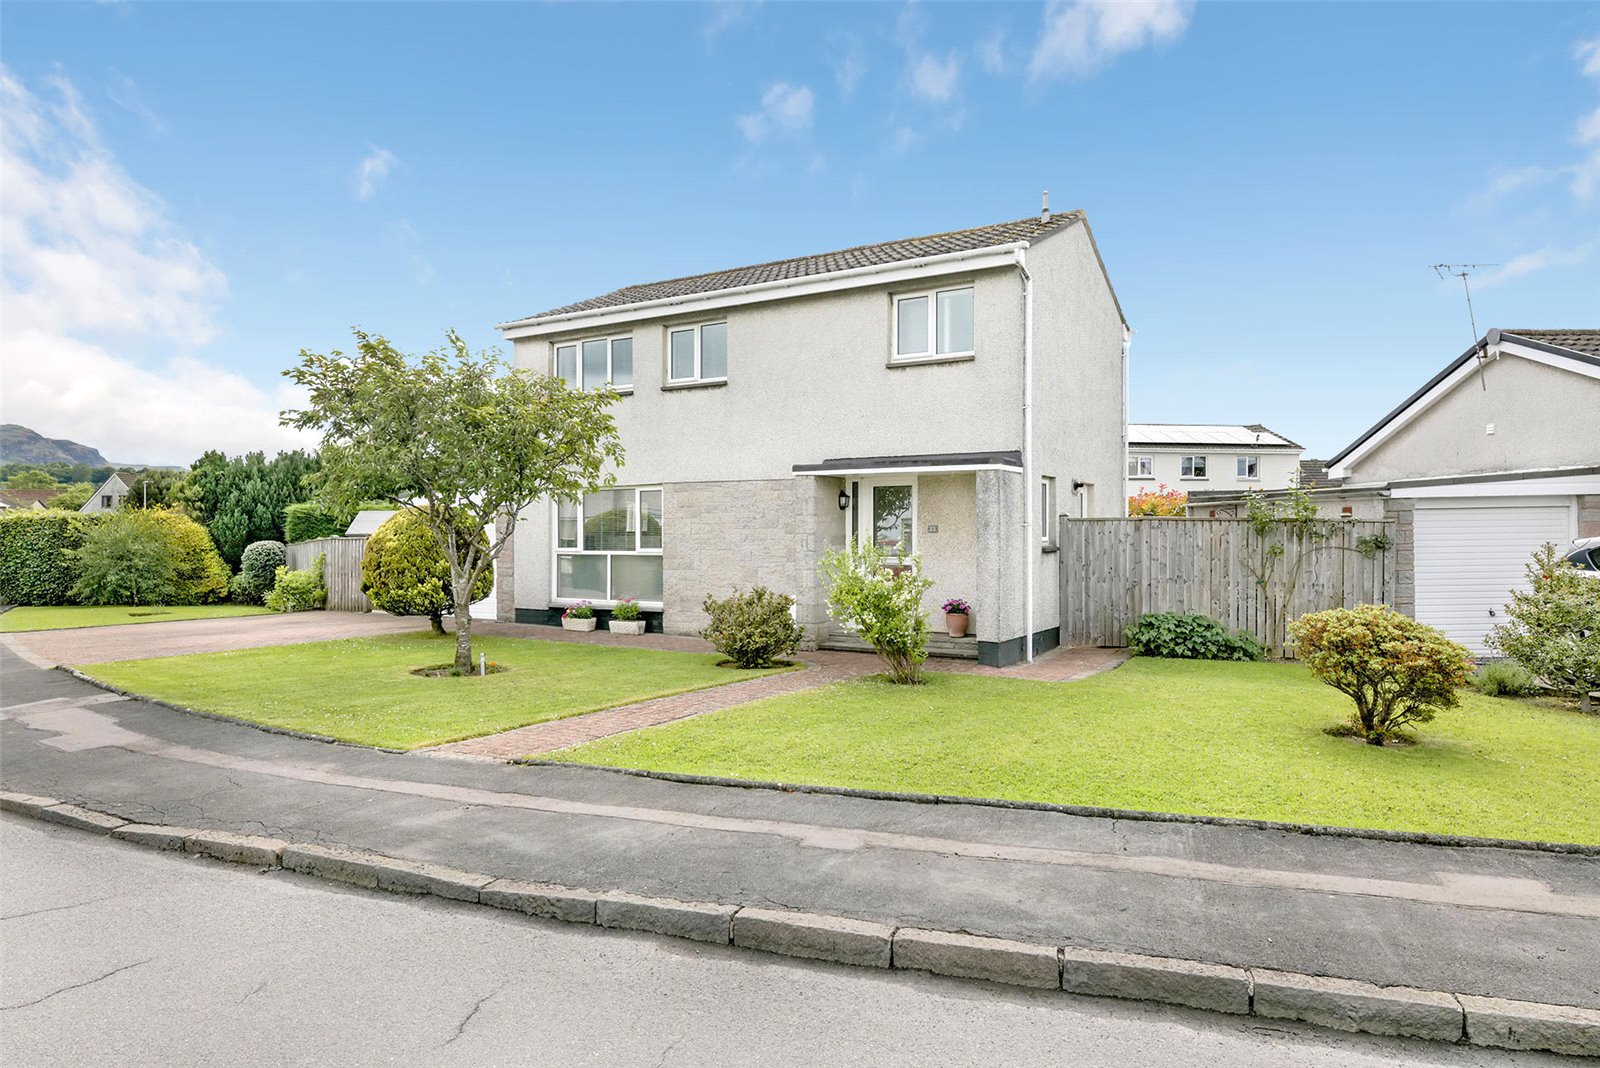 Stirling Property of the Week (2nd July 2022)